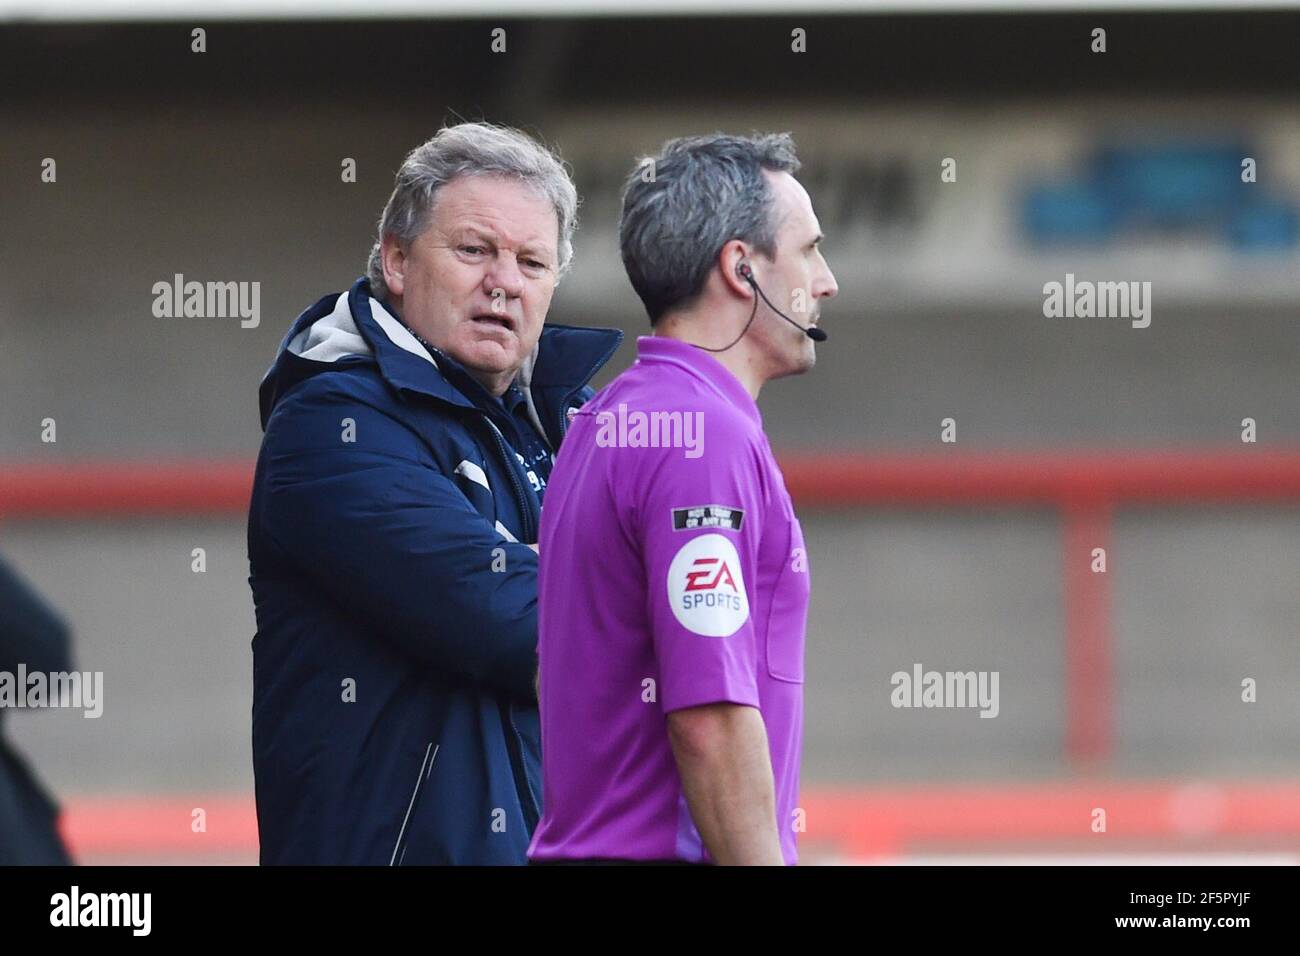 Crawley manager John Yems shows his frustration during the Sky Bet League Two match between Crawley Town and Port Vale at the People's Pension Stadium   , Crawley ,  UK - 27th March 2021 -  Editorial use only. No merchandising. For Football images FA and Premier League restrictions apply inc. no internet/mobile usage without FAPL license - for details contact Football Dataco Stock Photo